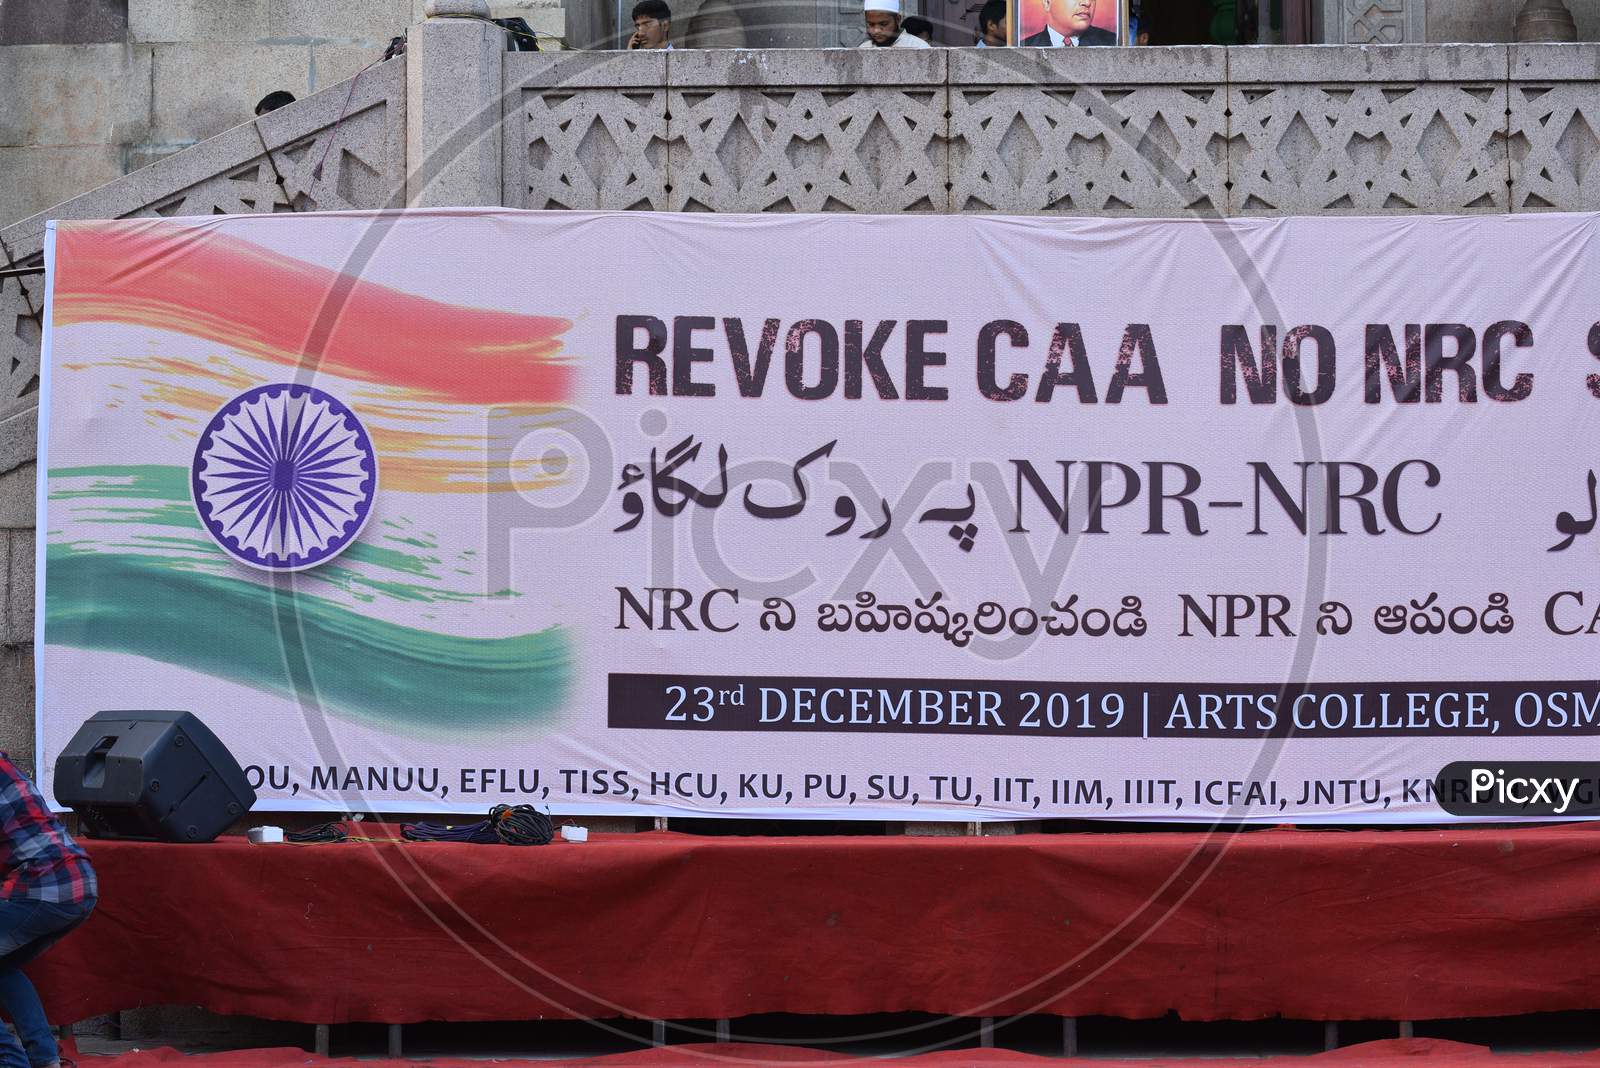 A poster against NRC and CAA at Osmania University